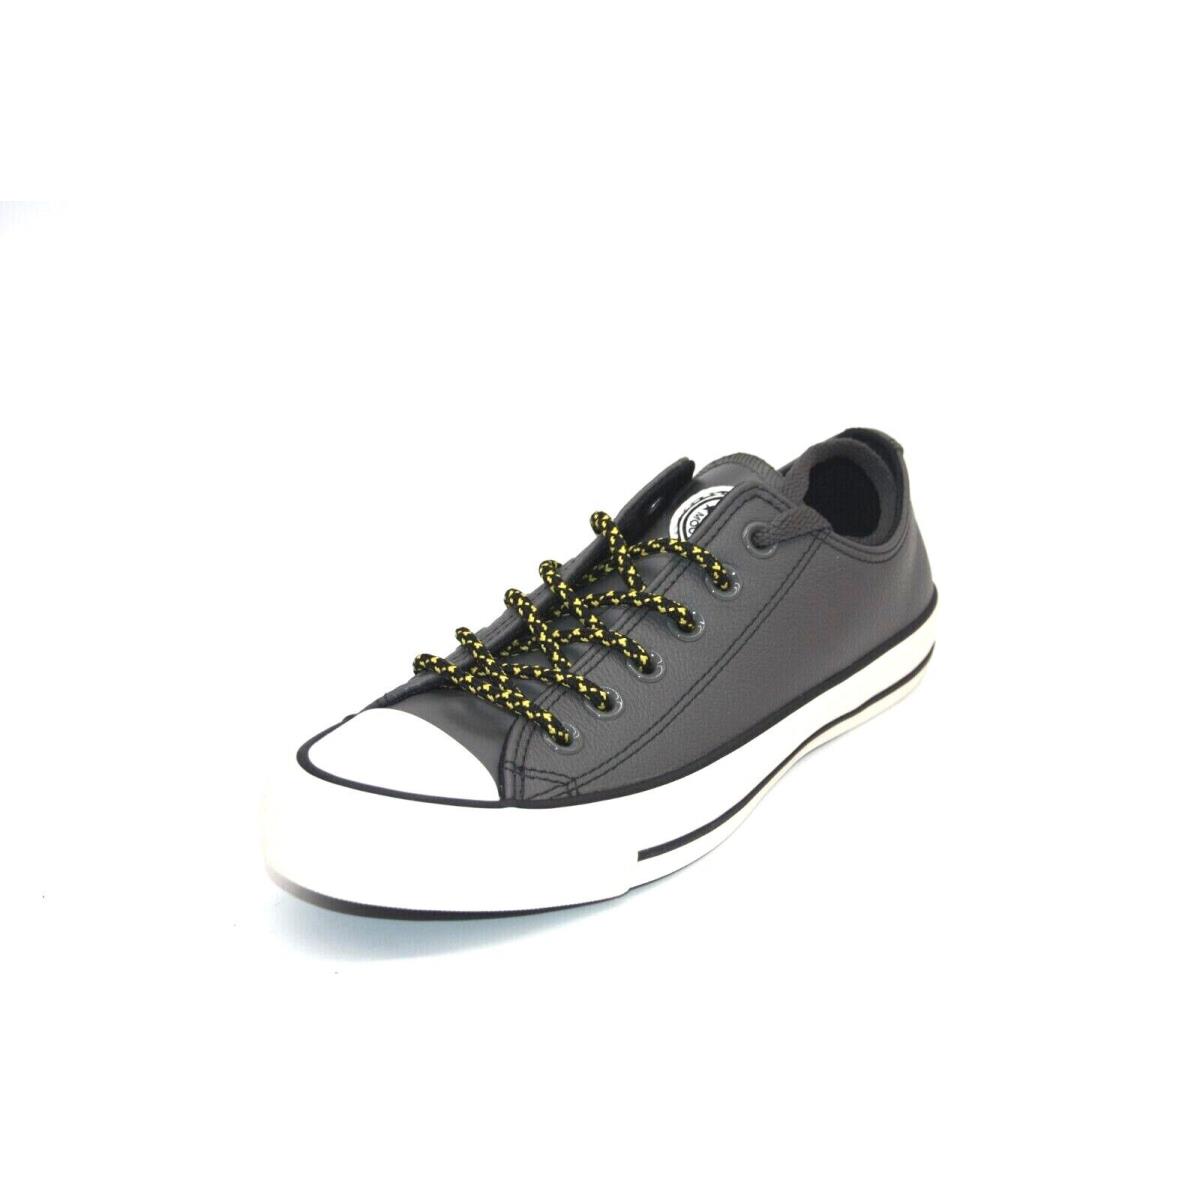 Converse Tumbled Leather Chuck Taylor All Star 165961C Carbon Grey/vivid Unisex